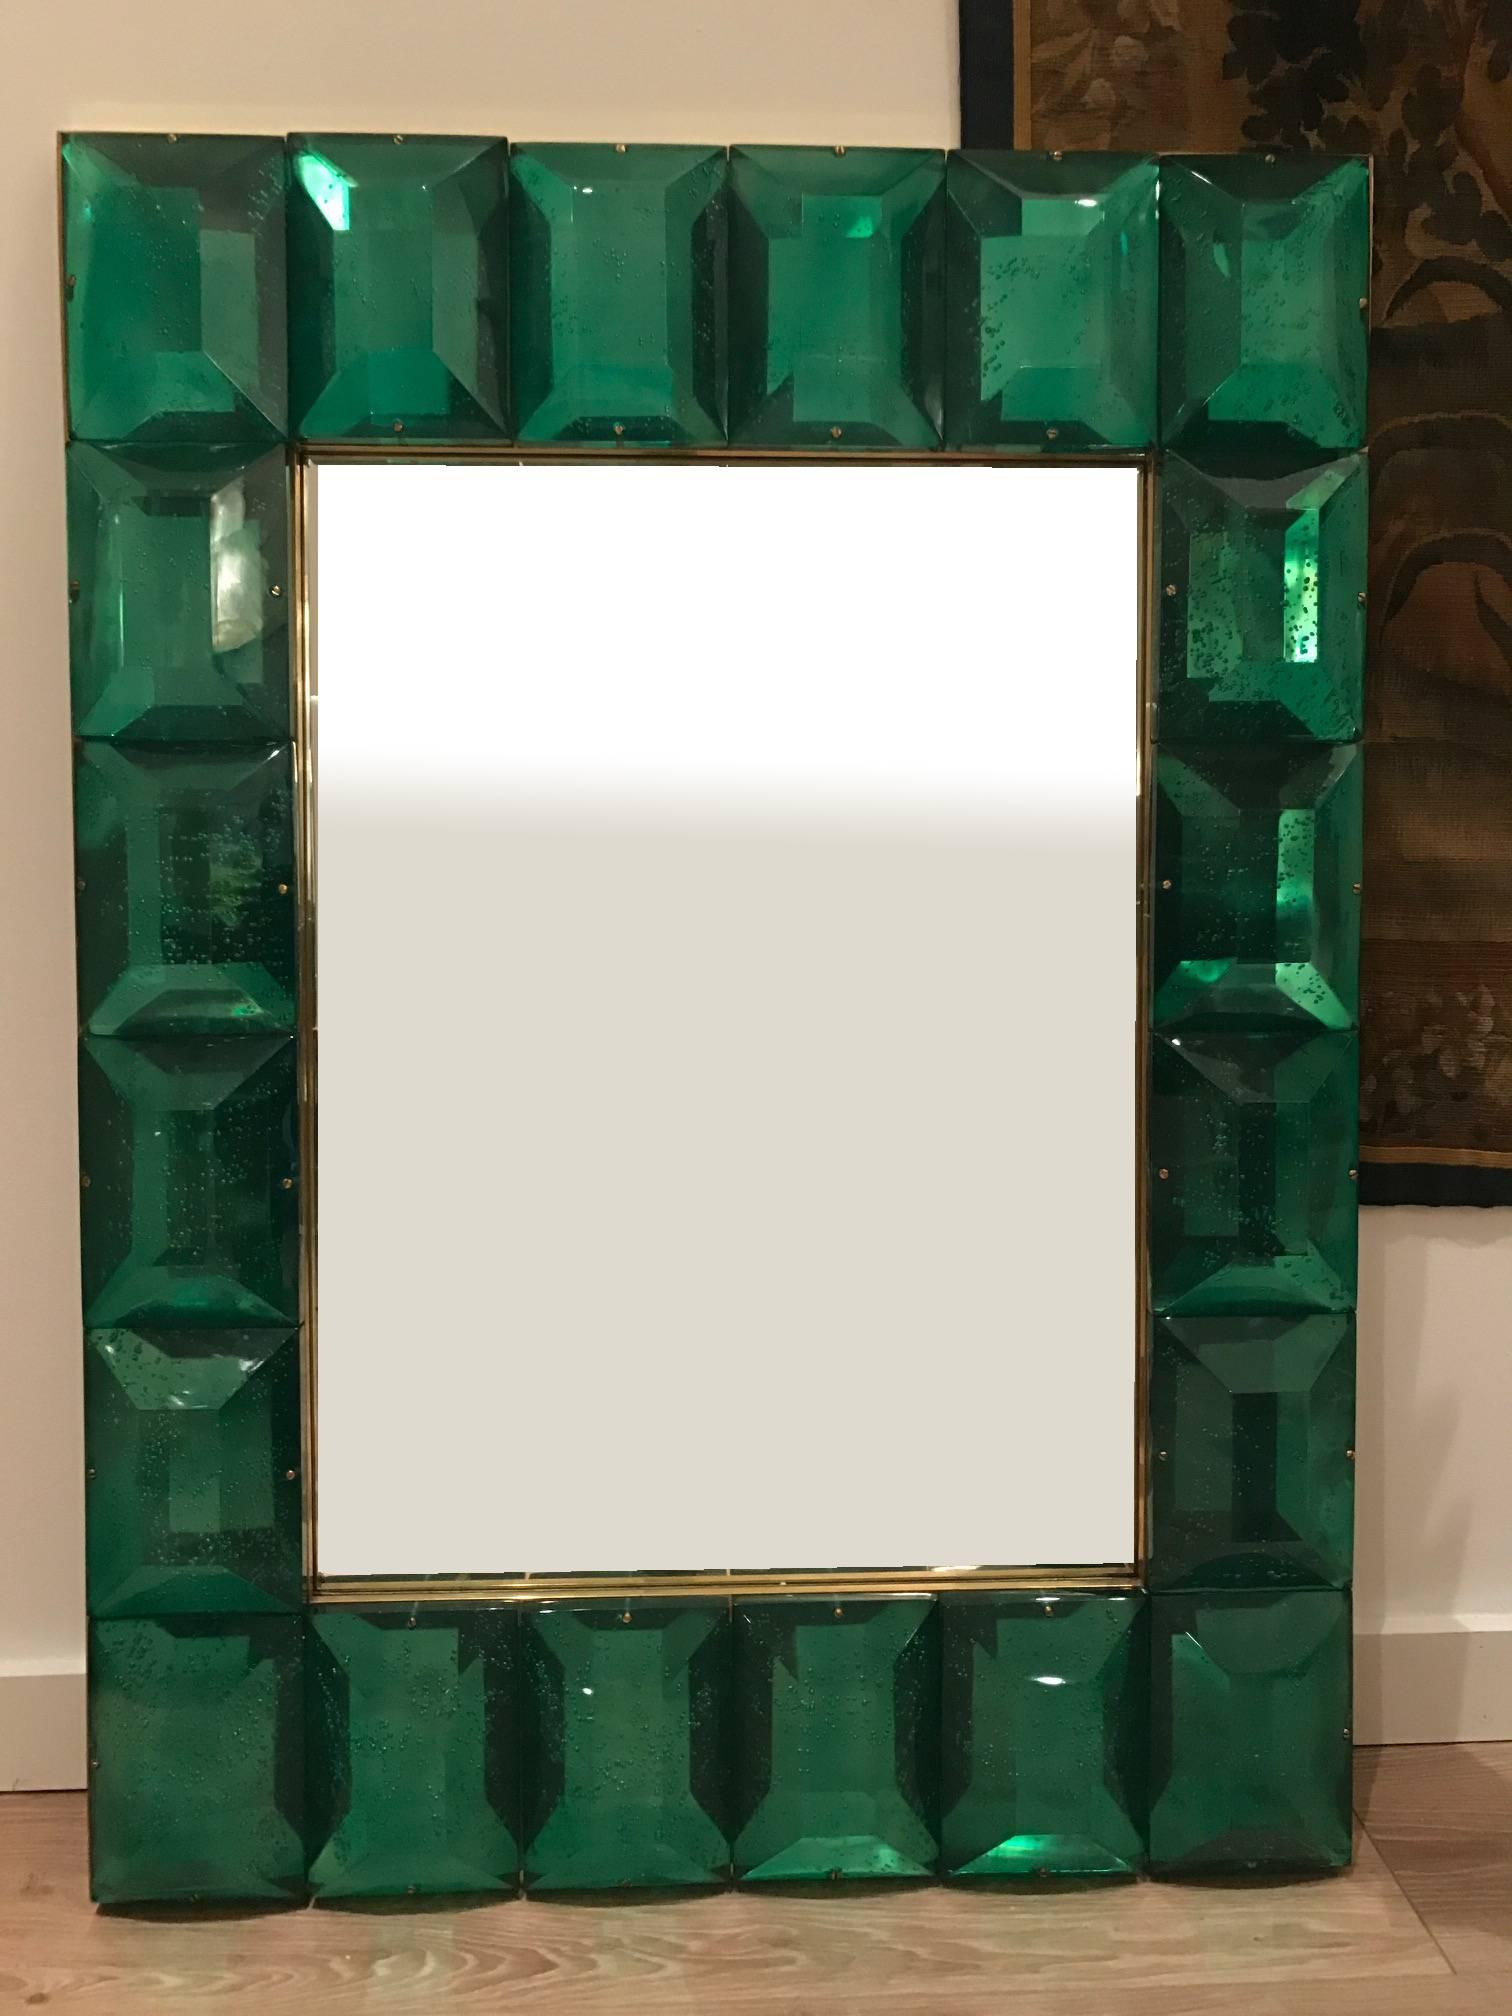  Customizable Faceted Murano Glass Mirror in Emerald Green
Contemporary and customizable mirror with a faceted Murano glass frame, edged in brass and handcrafted by a team of artisans in Venice, Italy. Each emerald green glass block has a highly